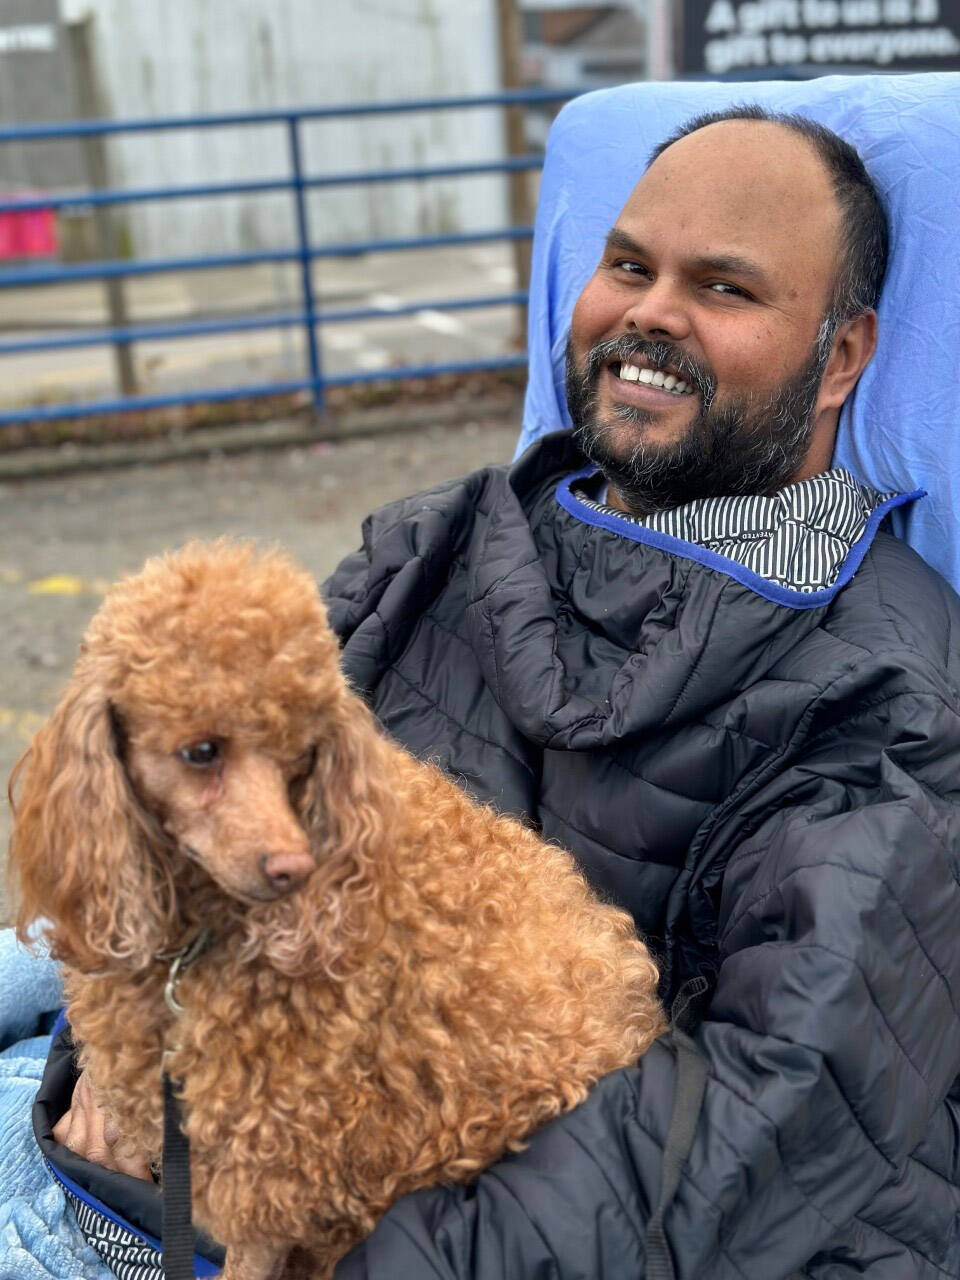 Kris Mallisetty, seen here with poodle Erica, was paralyzed from the neck down during surgery on his spine on Jan. 27. Because he doesnt qualify for Persons With Disability funding, a friend has set up a fundraiser to help pay for the costs of making his home wheelchair-accessible. (Leah Gray photo)